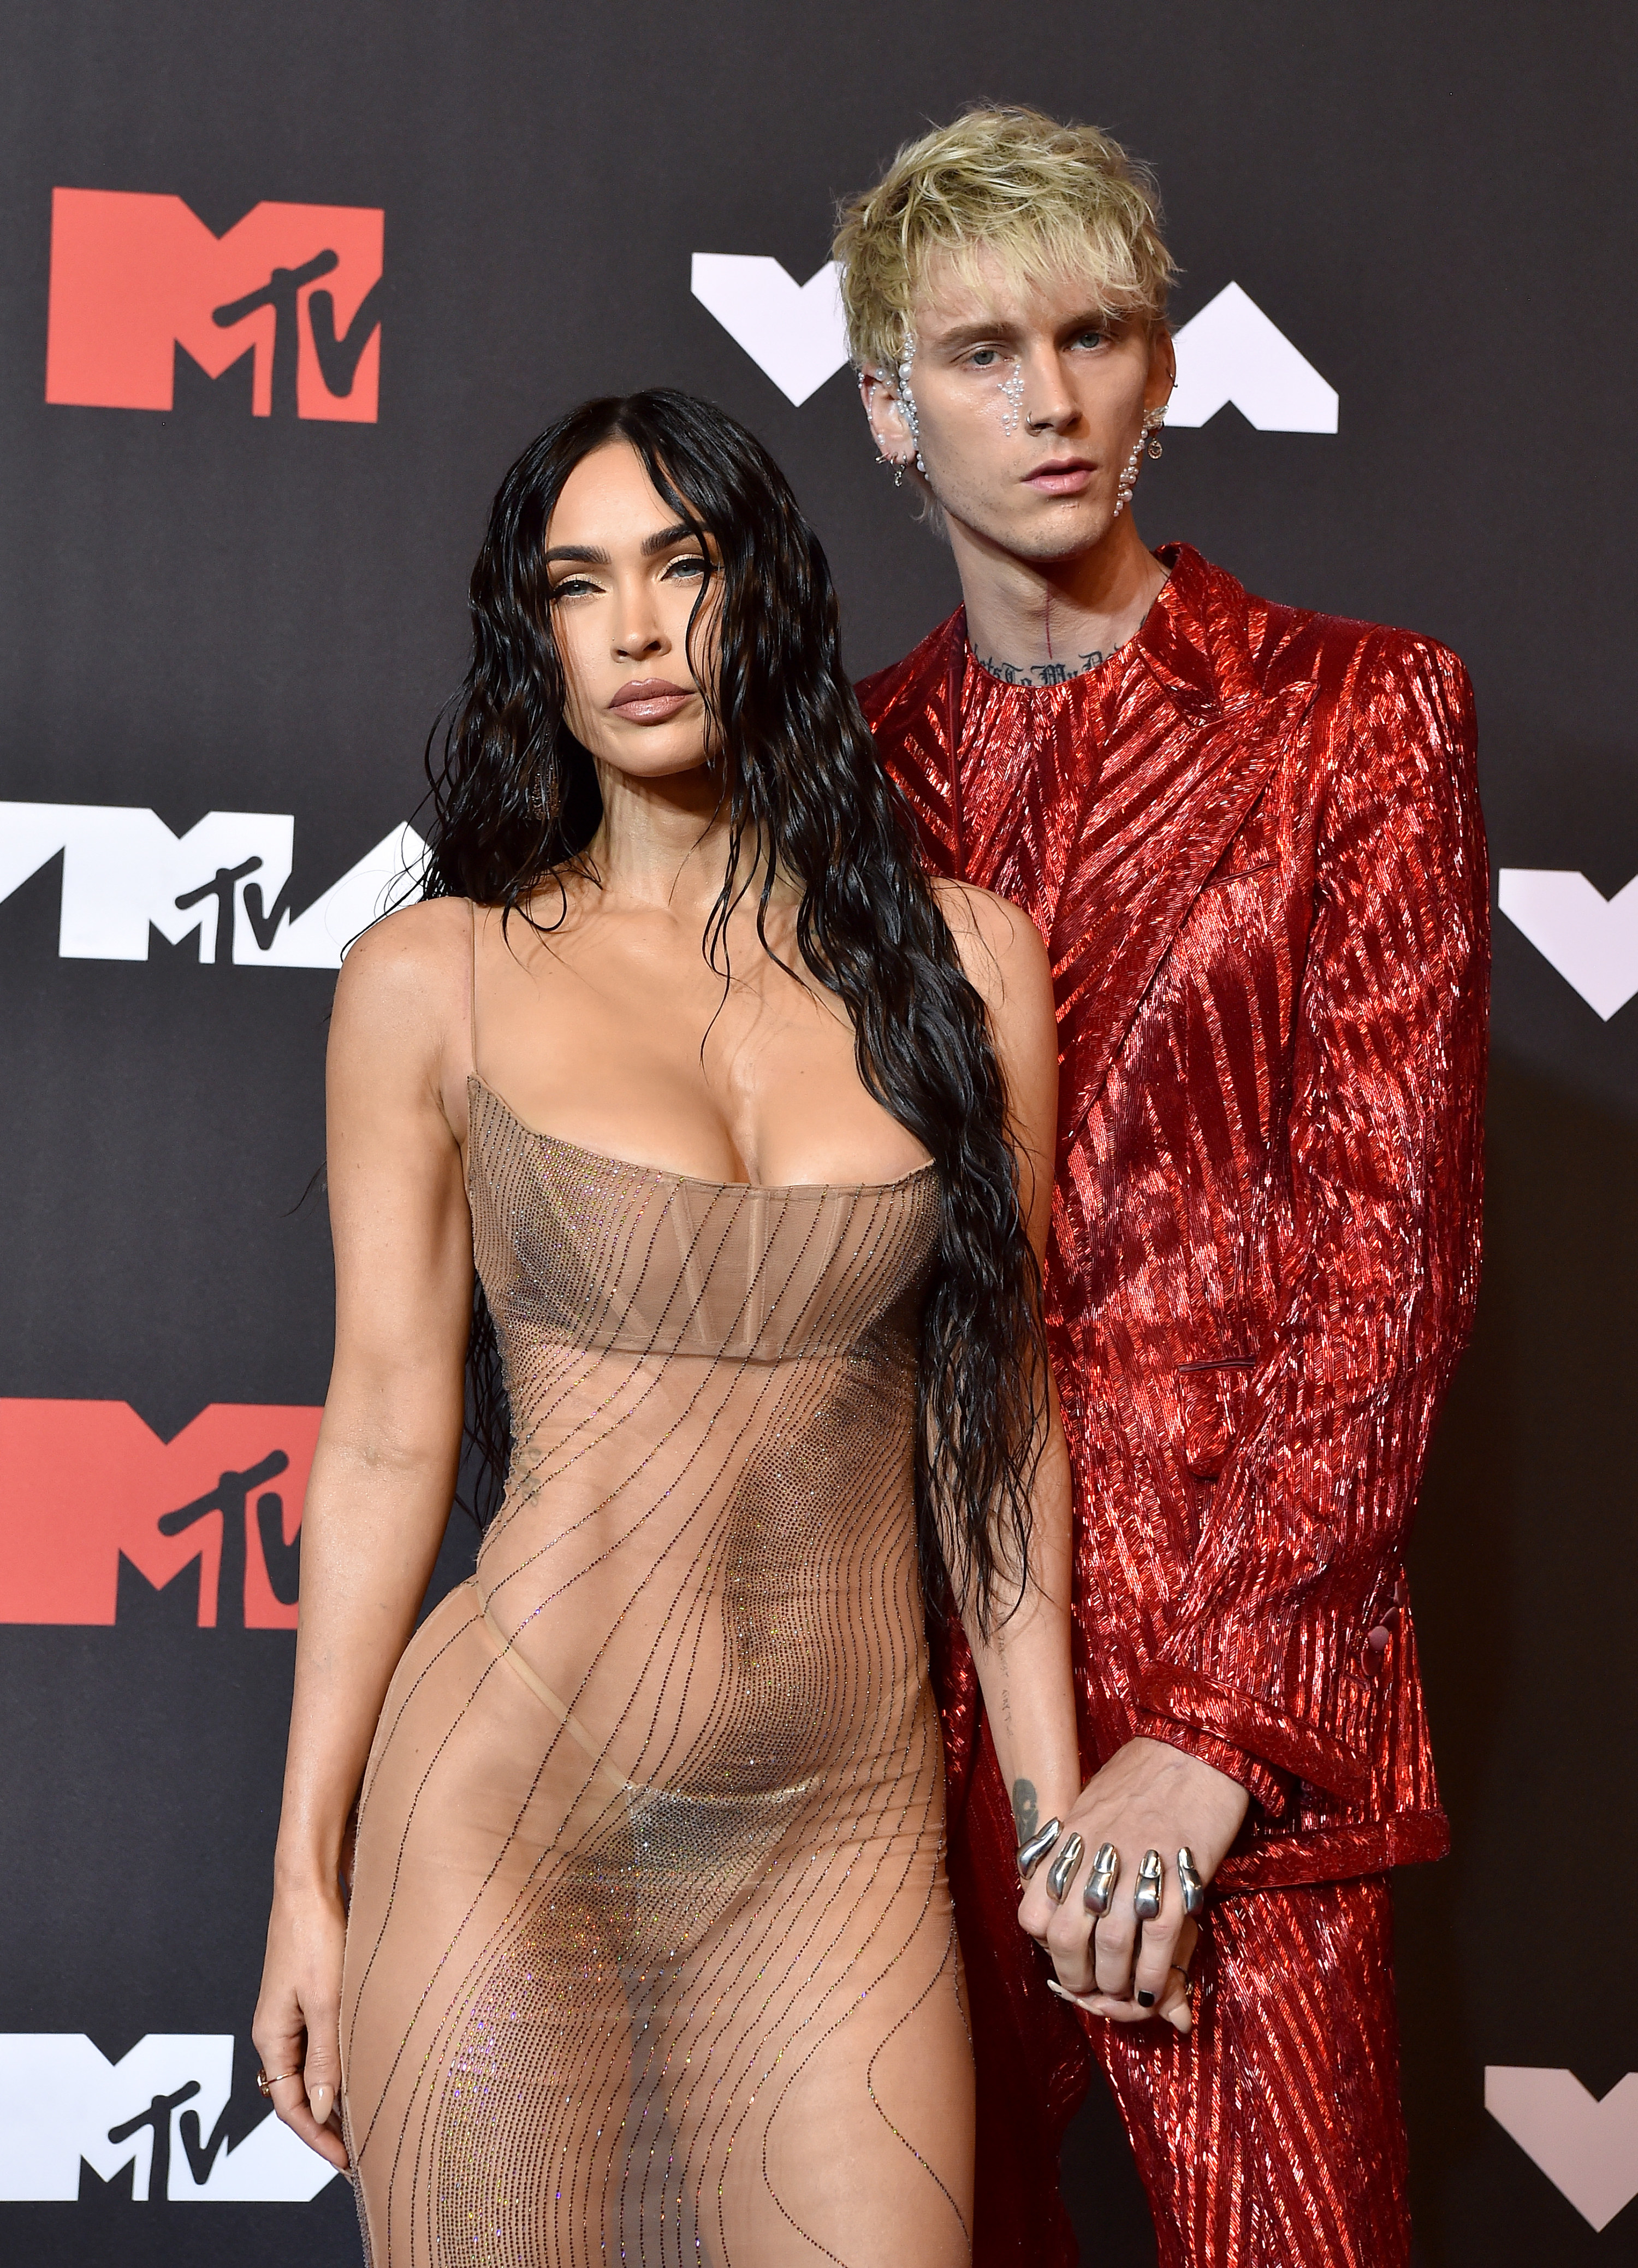 Megan in a sheer outfit and MGK in a sparkly suit at an MTV event